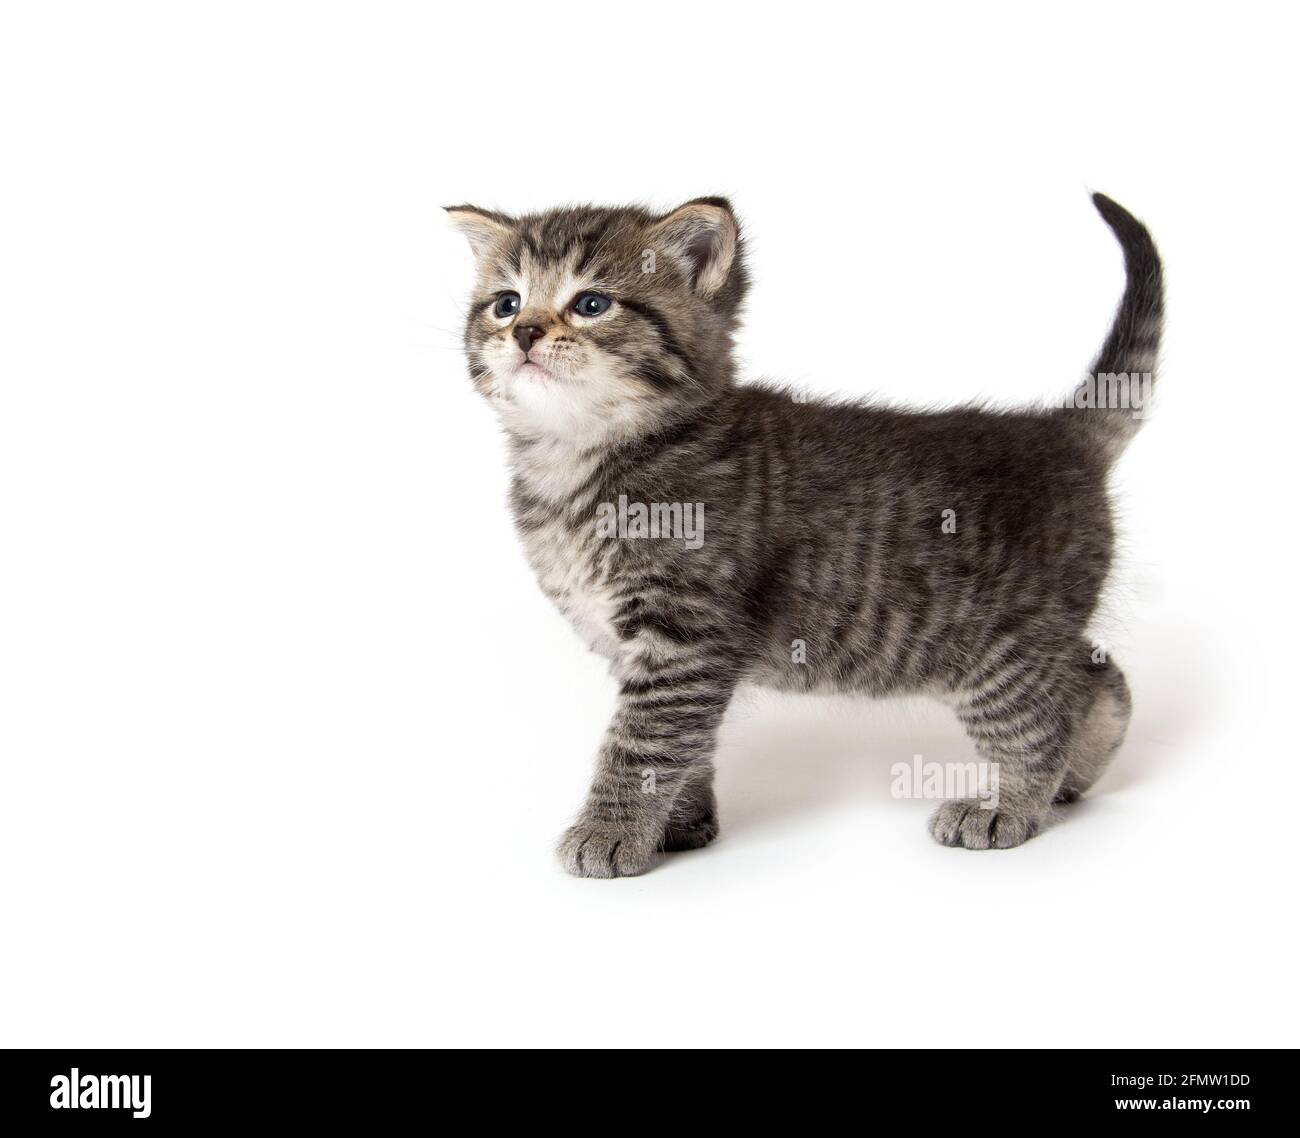 Cute baby tabby kitten isolated on white background Stock Photo